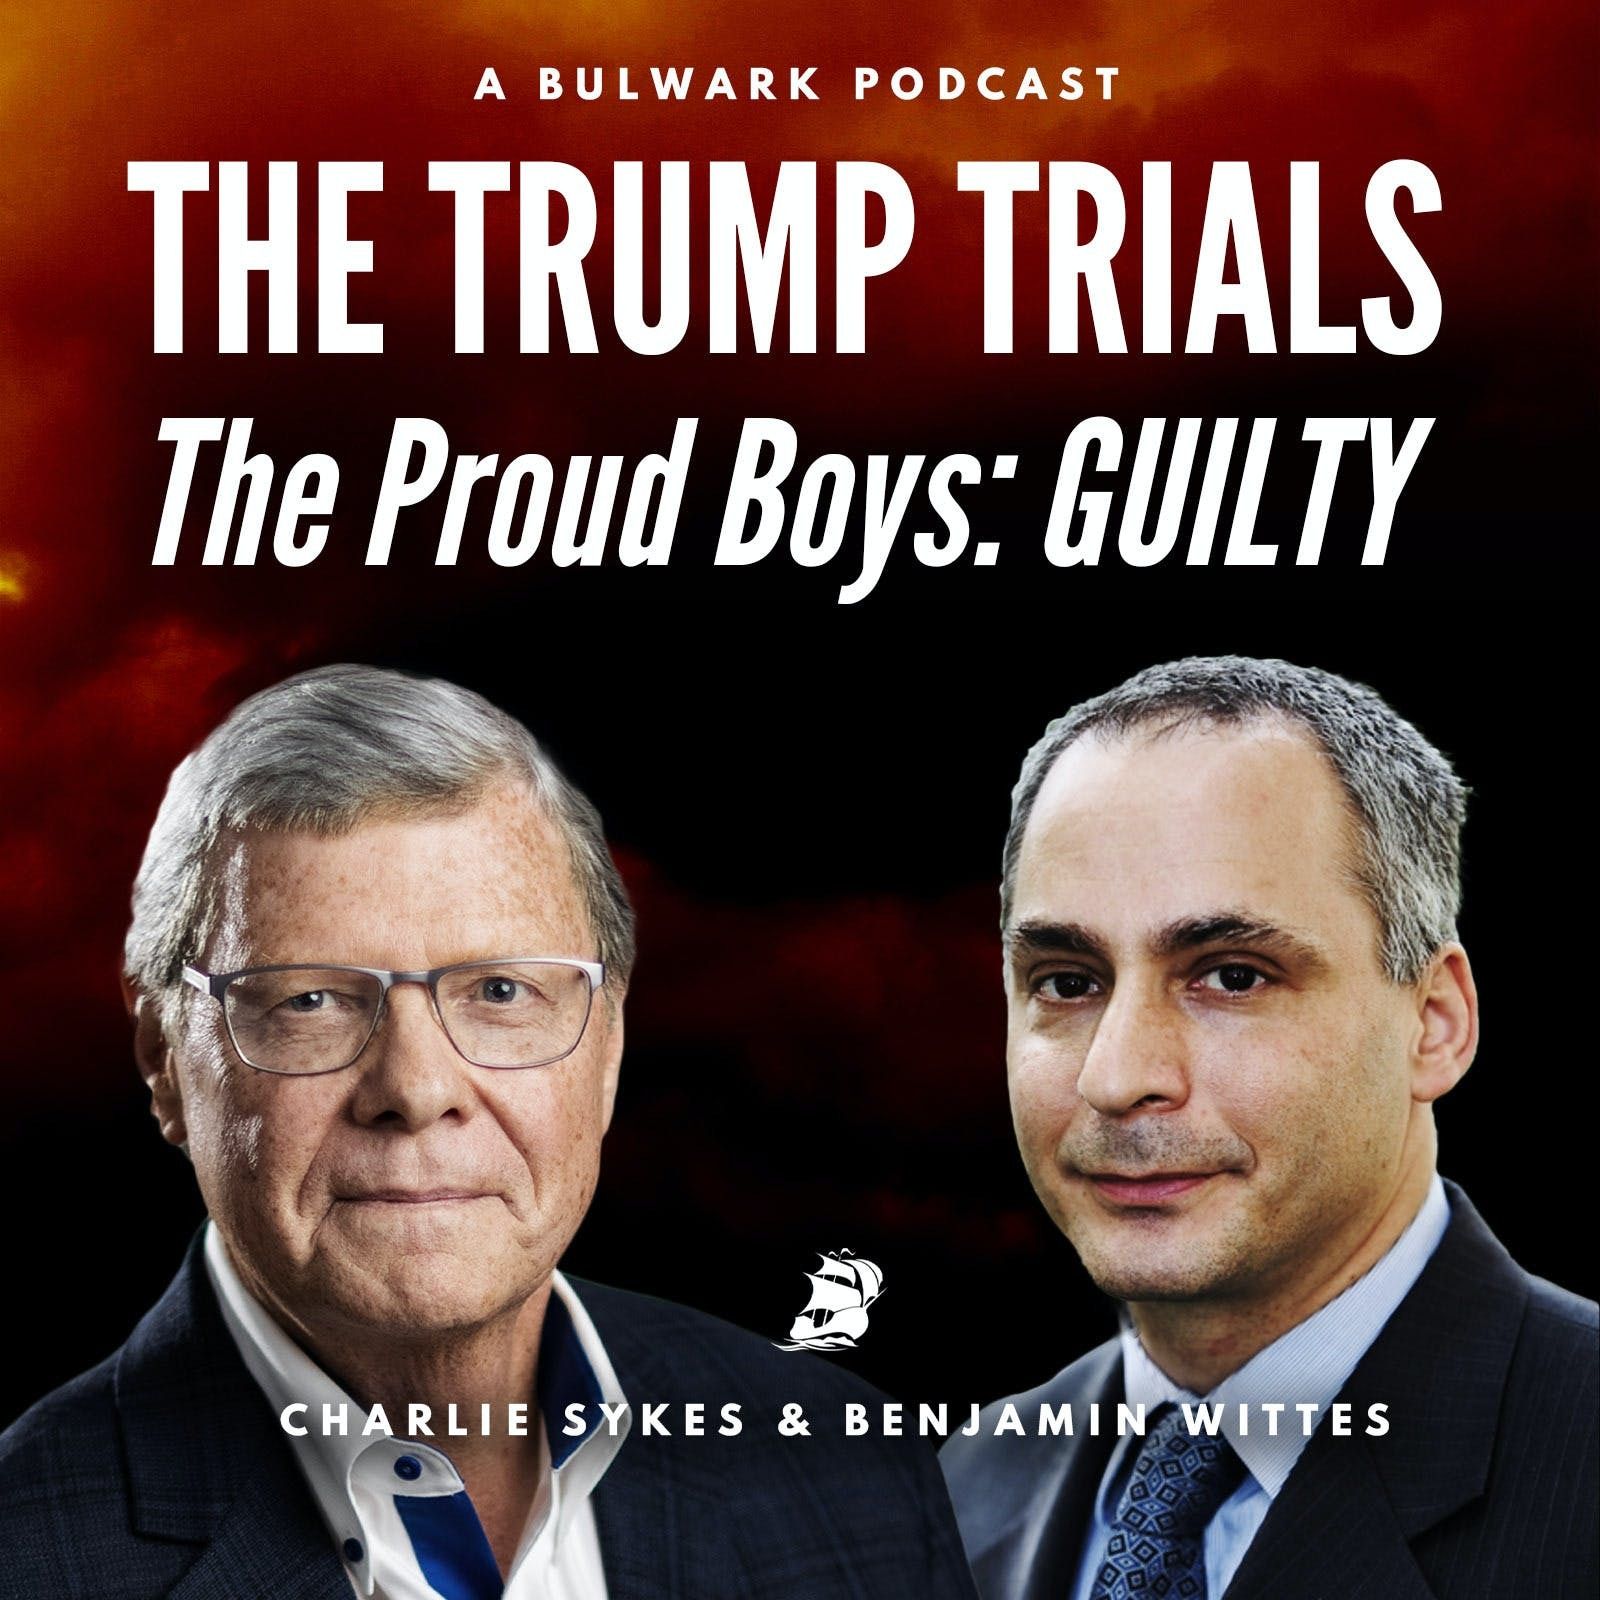 The Proud Boys: GUILTY by The Bulwark Podcast